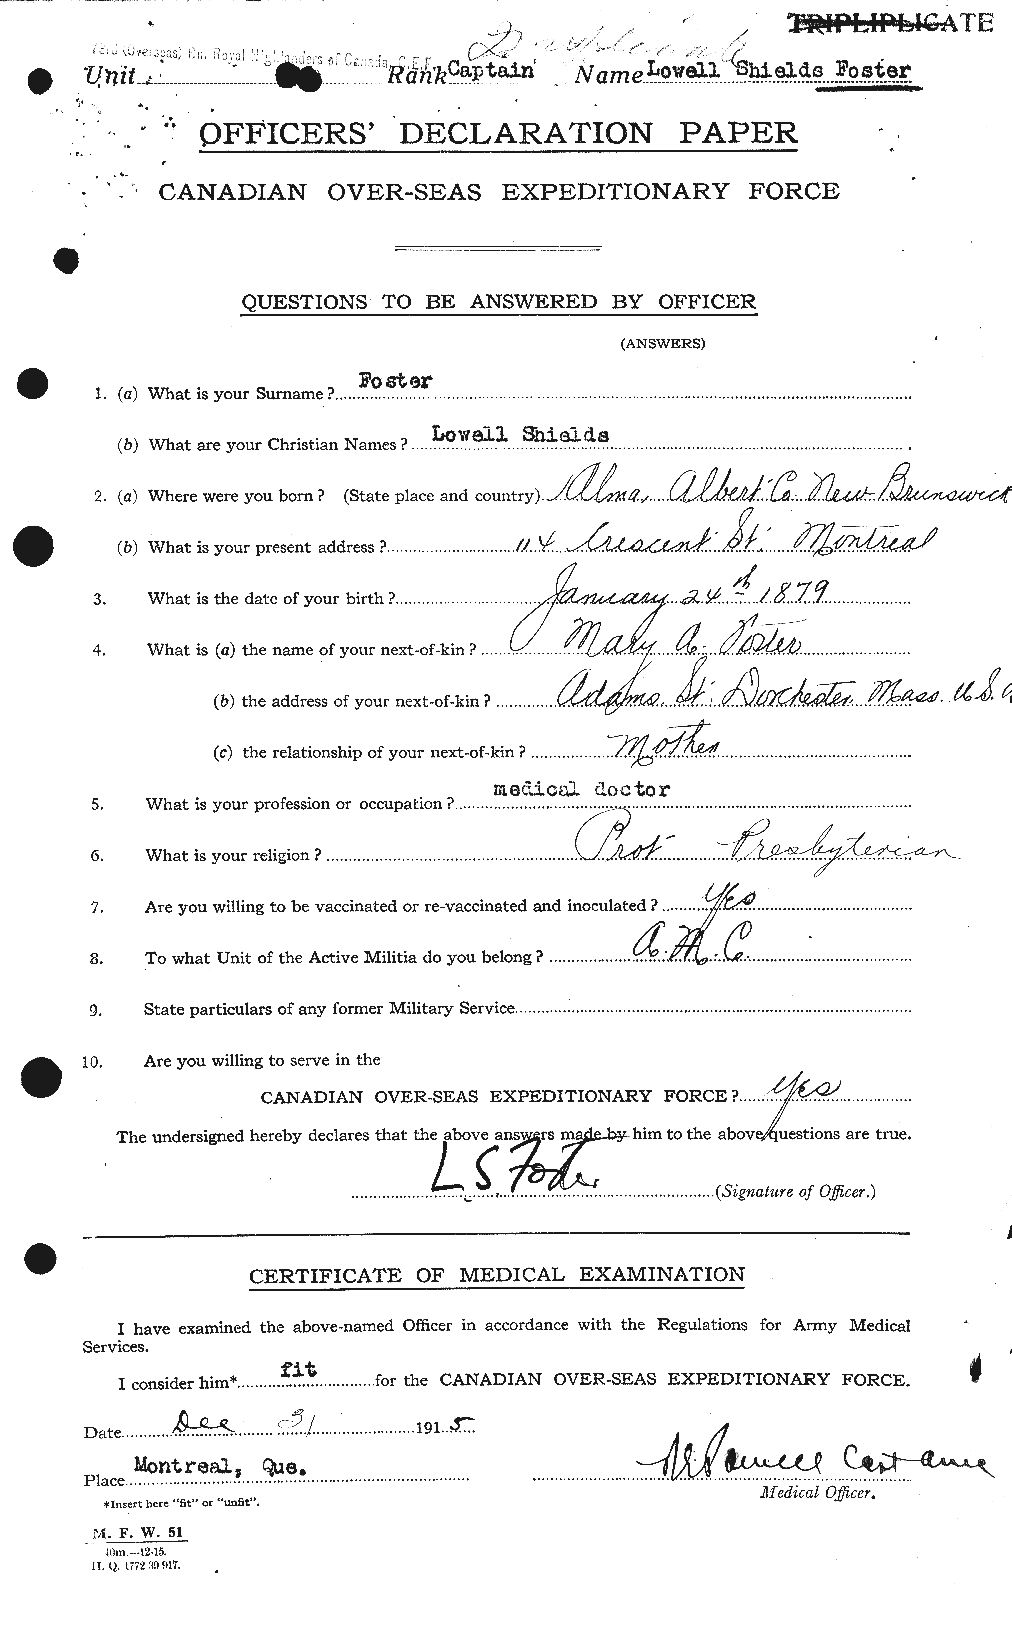 Personnel Records of the First World War - CEF 333414a